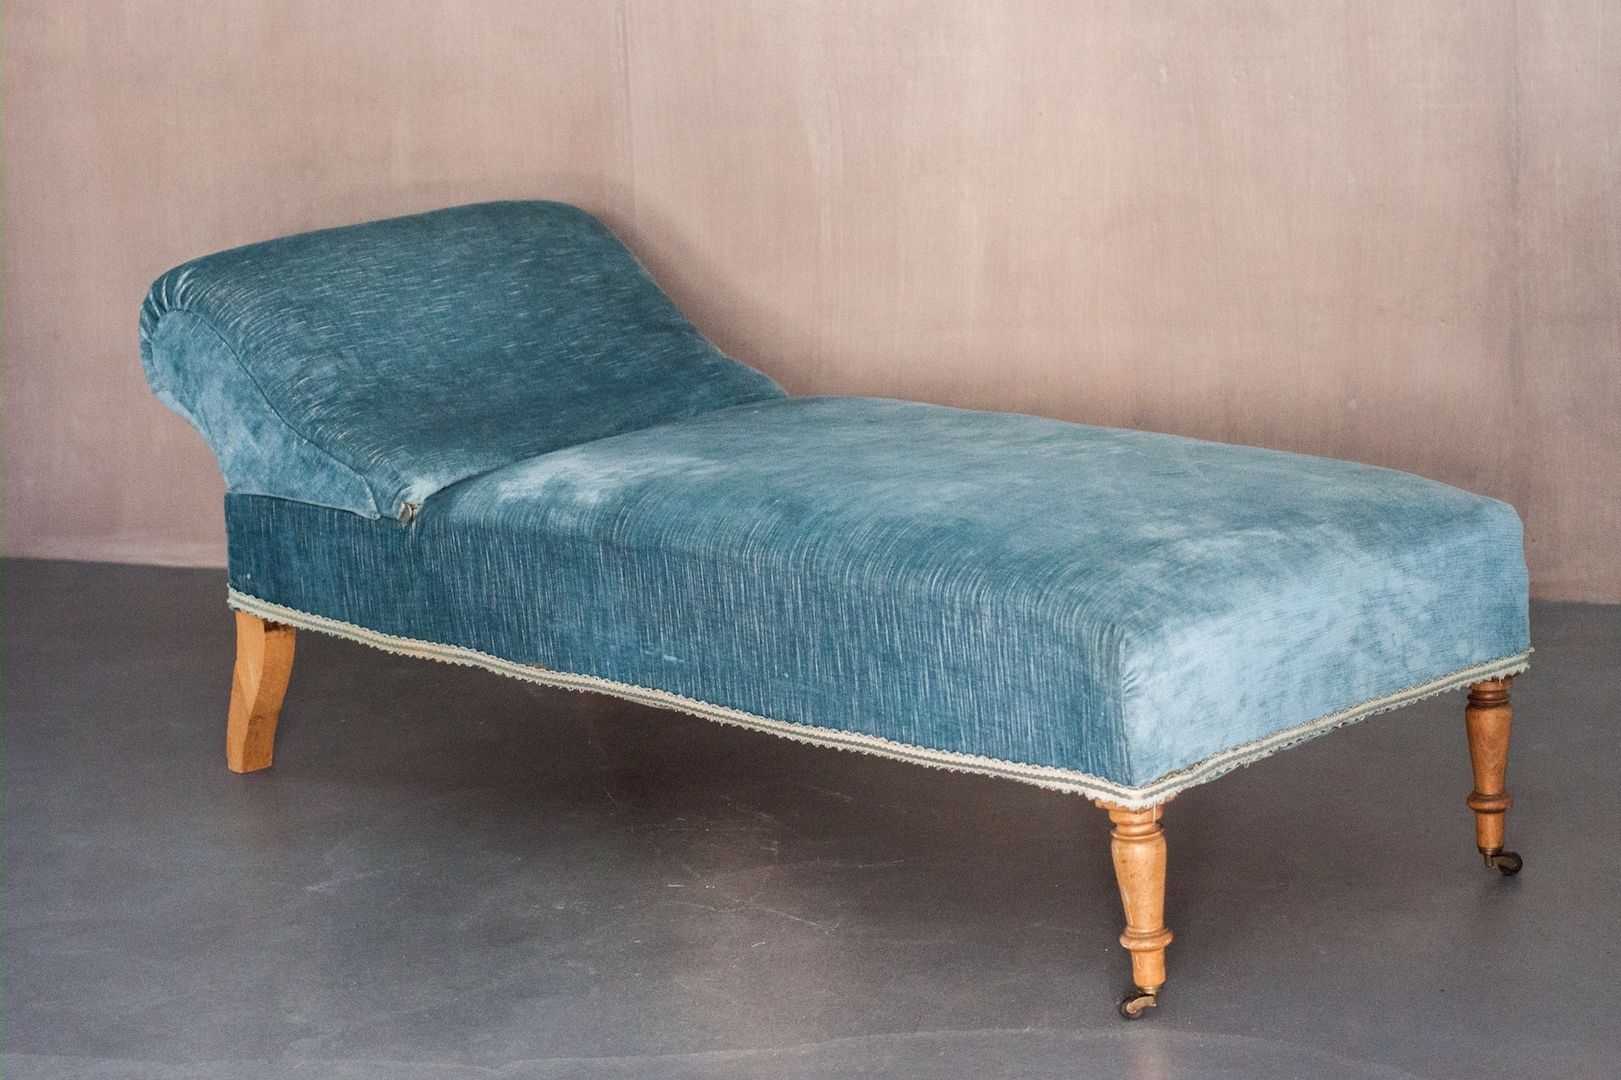 Famous Vintage Chaise Lounge With Sky Blue Velvet Upholstery For Sale At Regarding Teal Chaise Lounges (View 7 of 15)